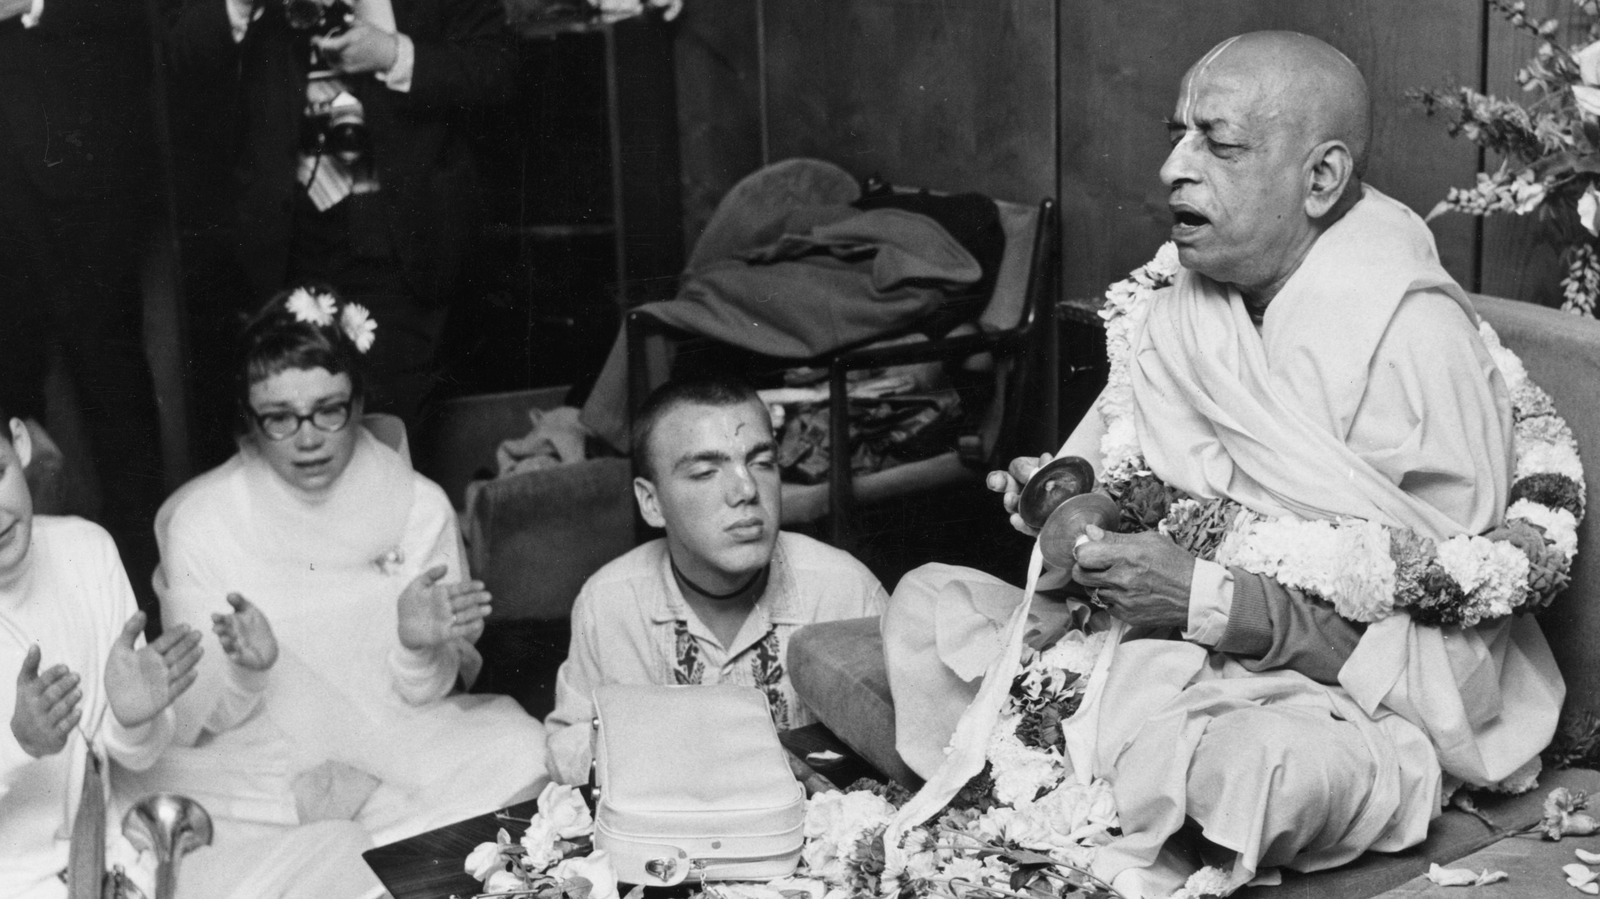 Former US Hare Krishna leader dies in India at 74